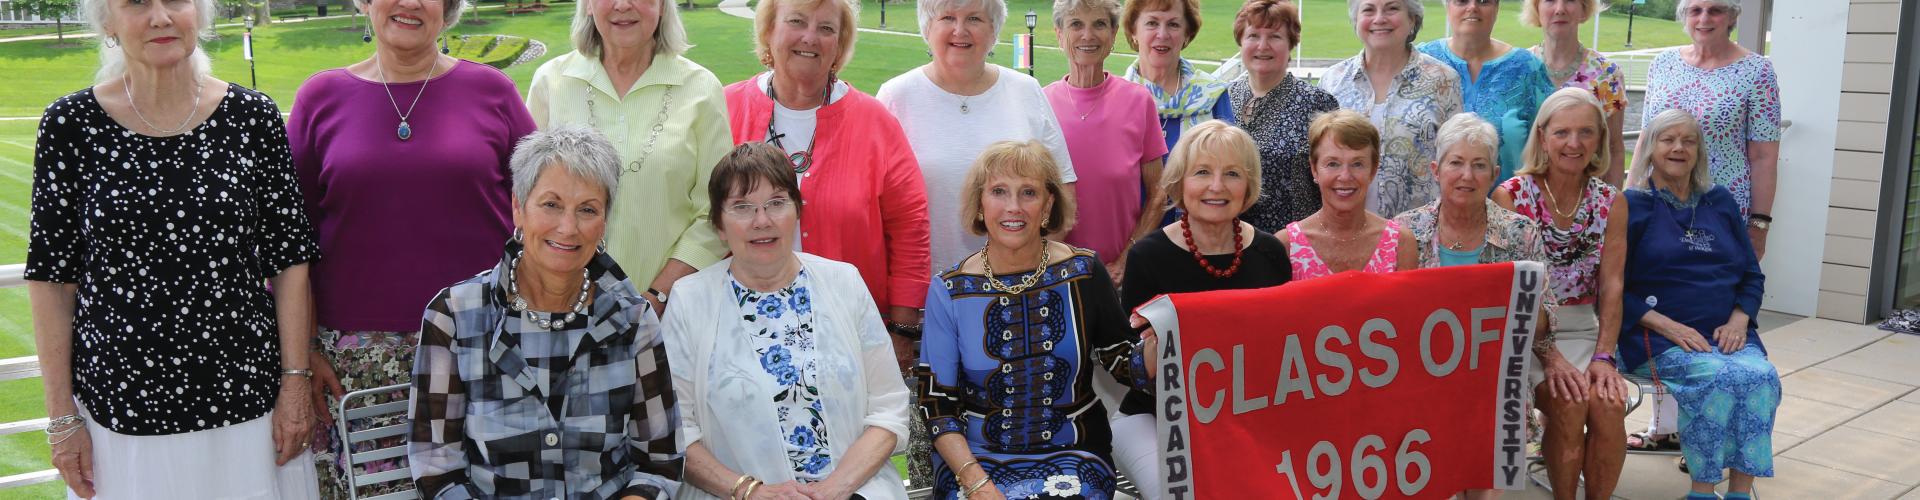 Large group of Senior Alumni women from the Class of 1966.